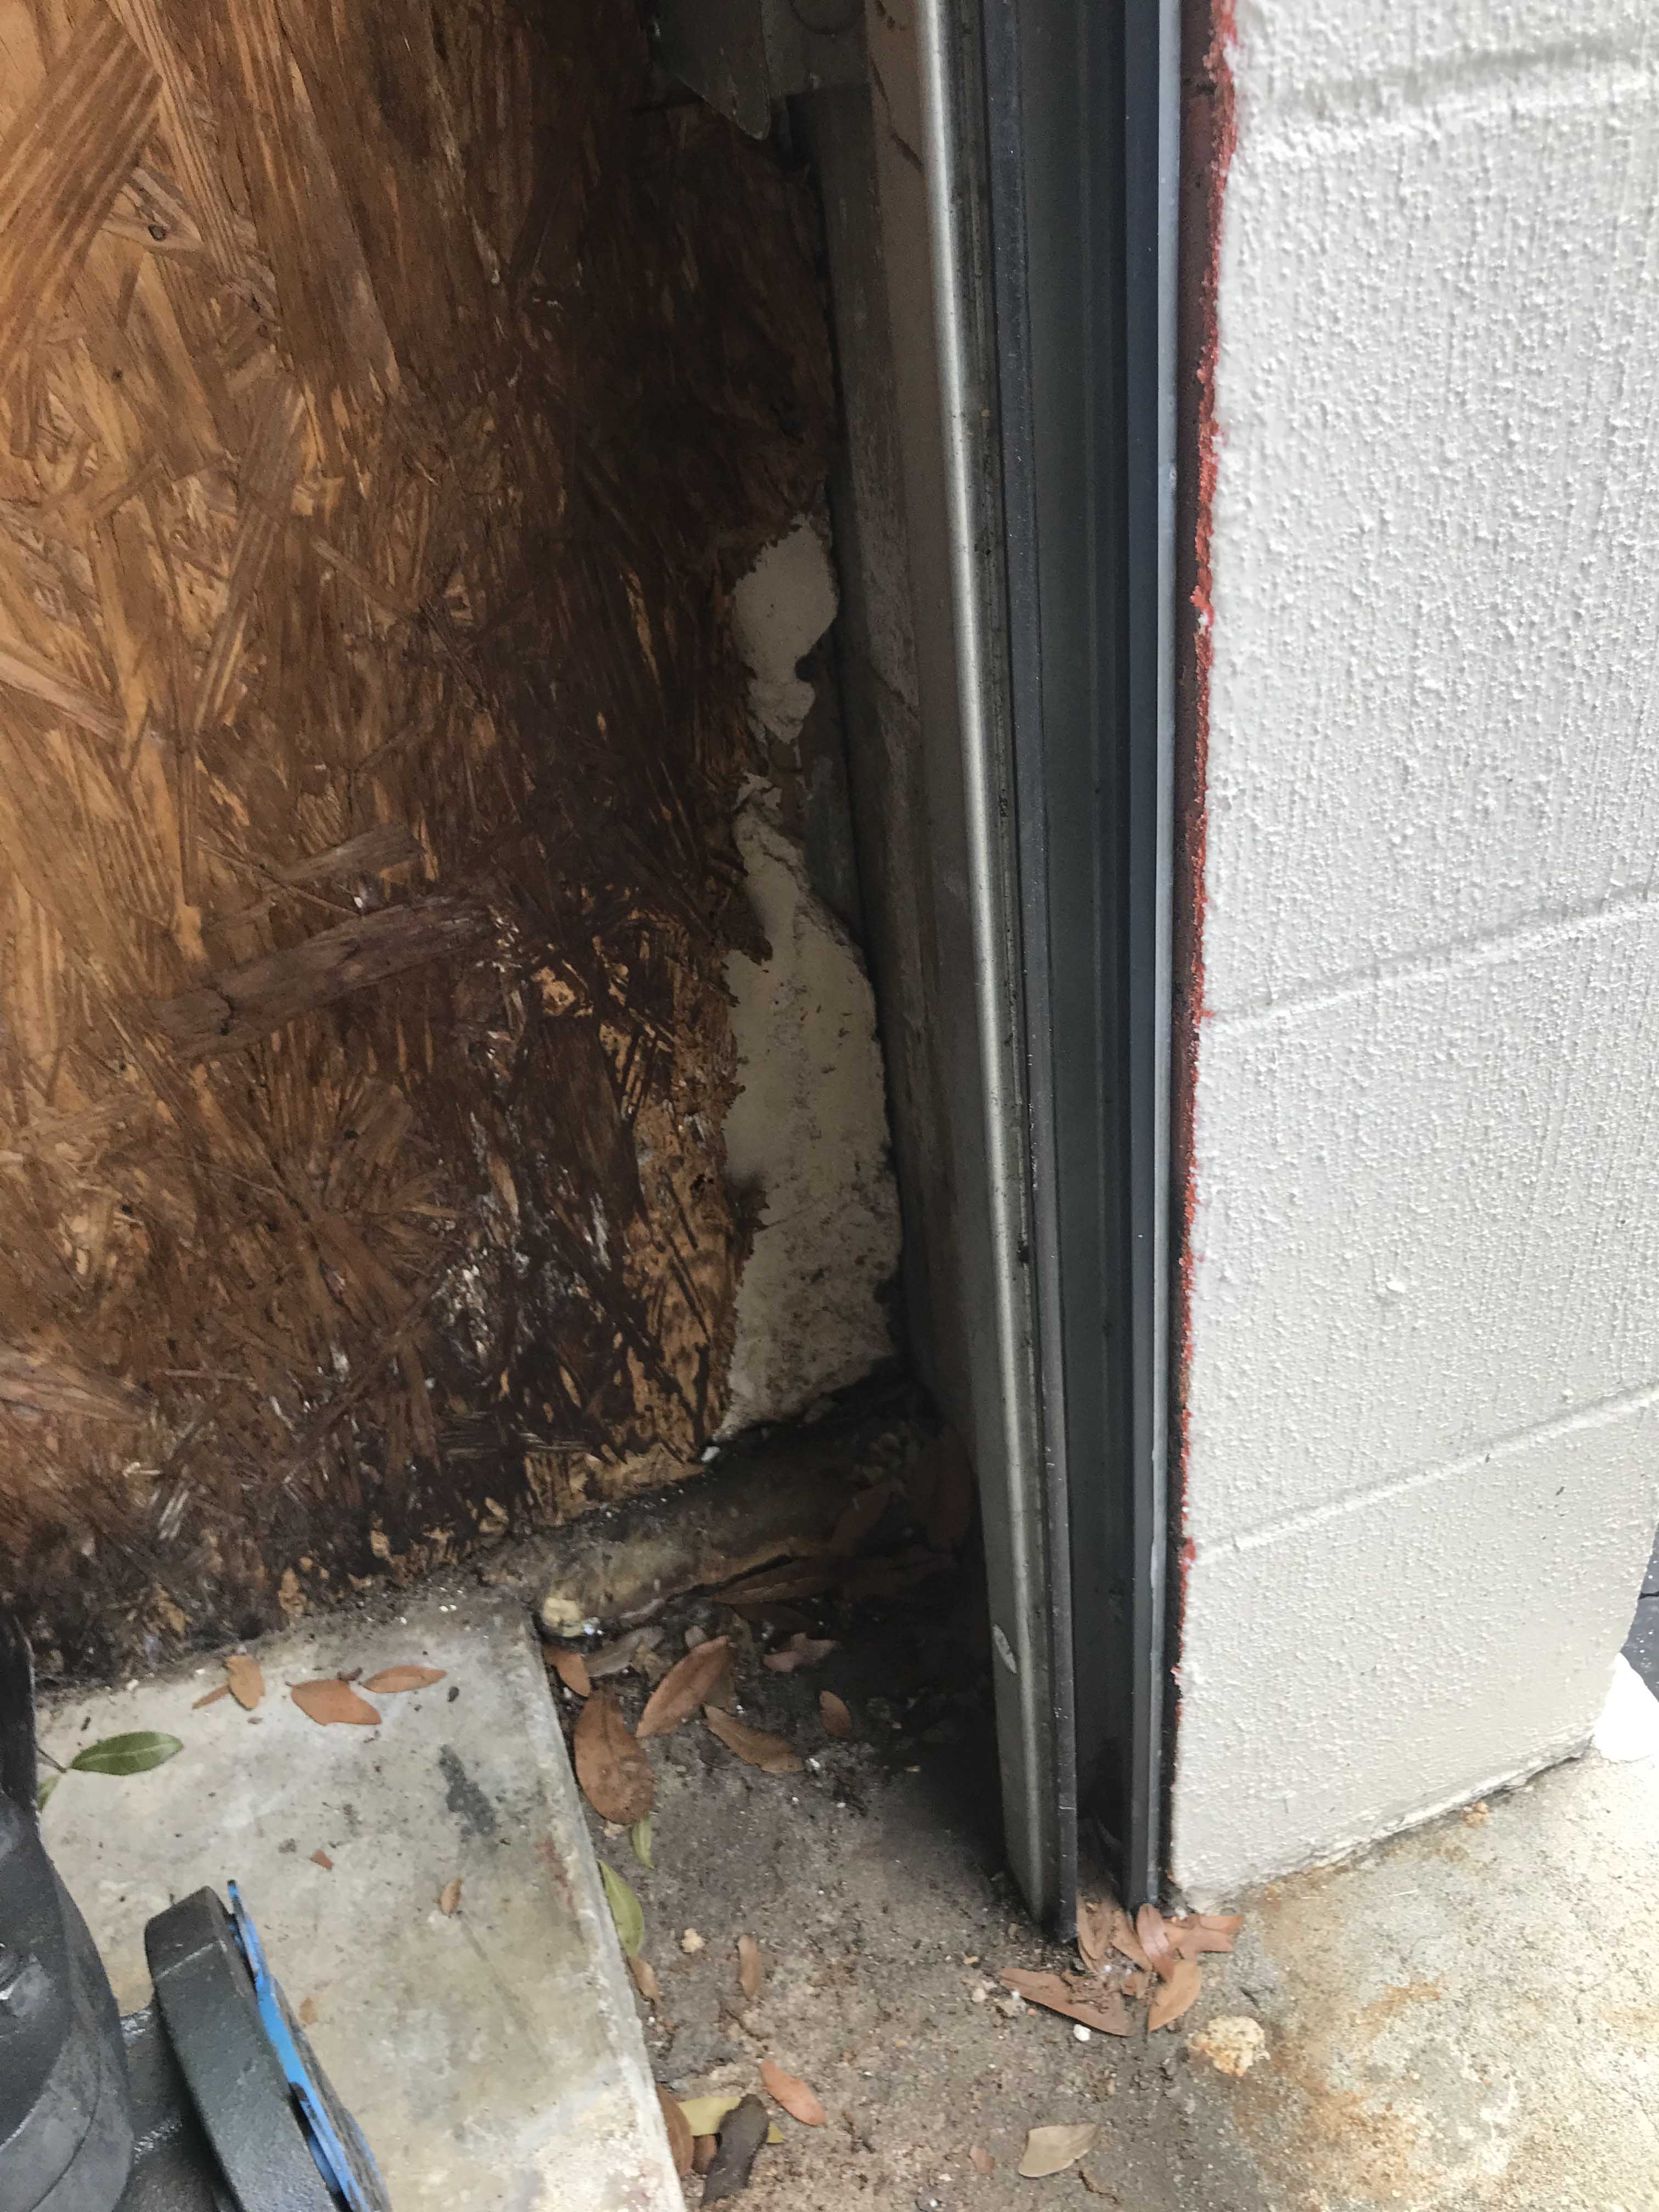 Mold and rotten wood